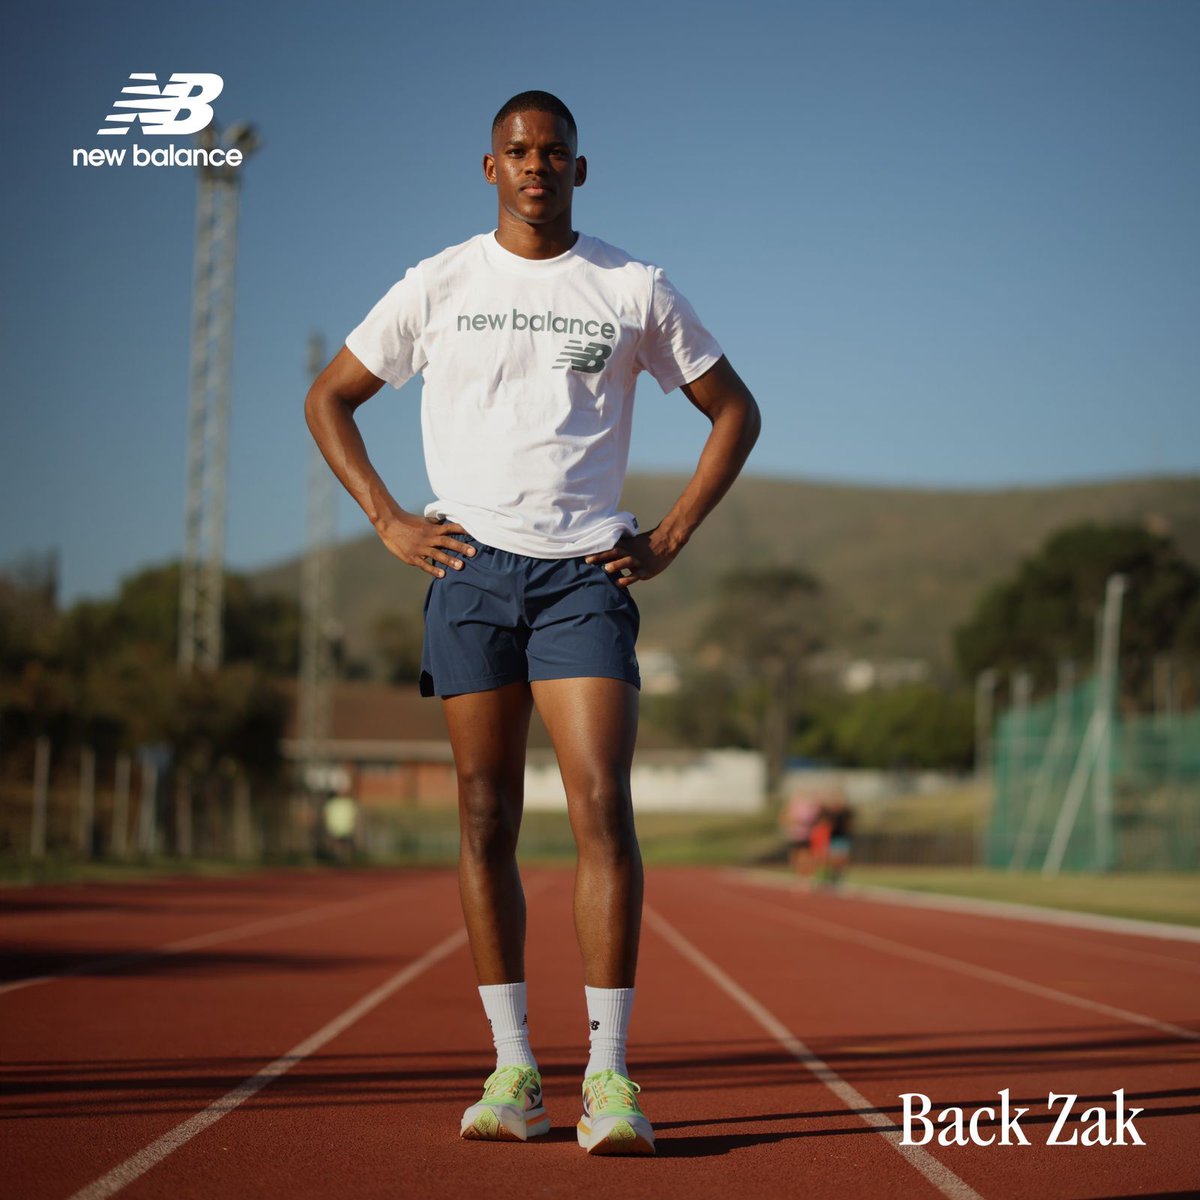 400m in 44.74. This is Zakithi Nene’s PB and platform going into his biggest season yet on the world stage. Send him some support, because success comes from confidence. #BackZak #BackPageZak #WeGotNow